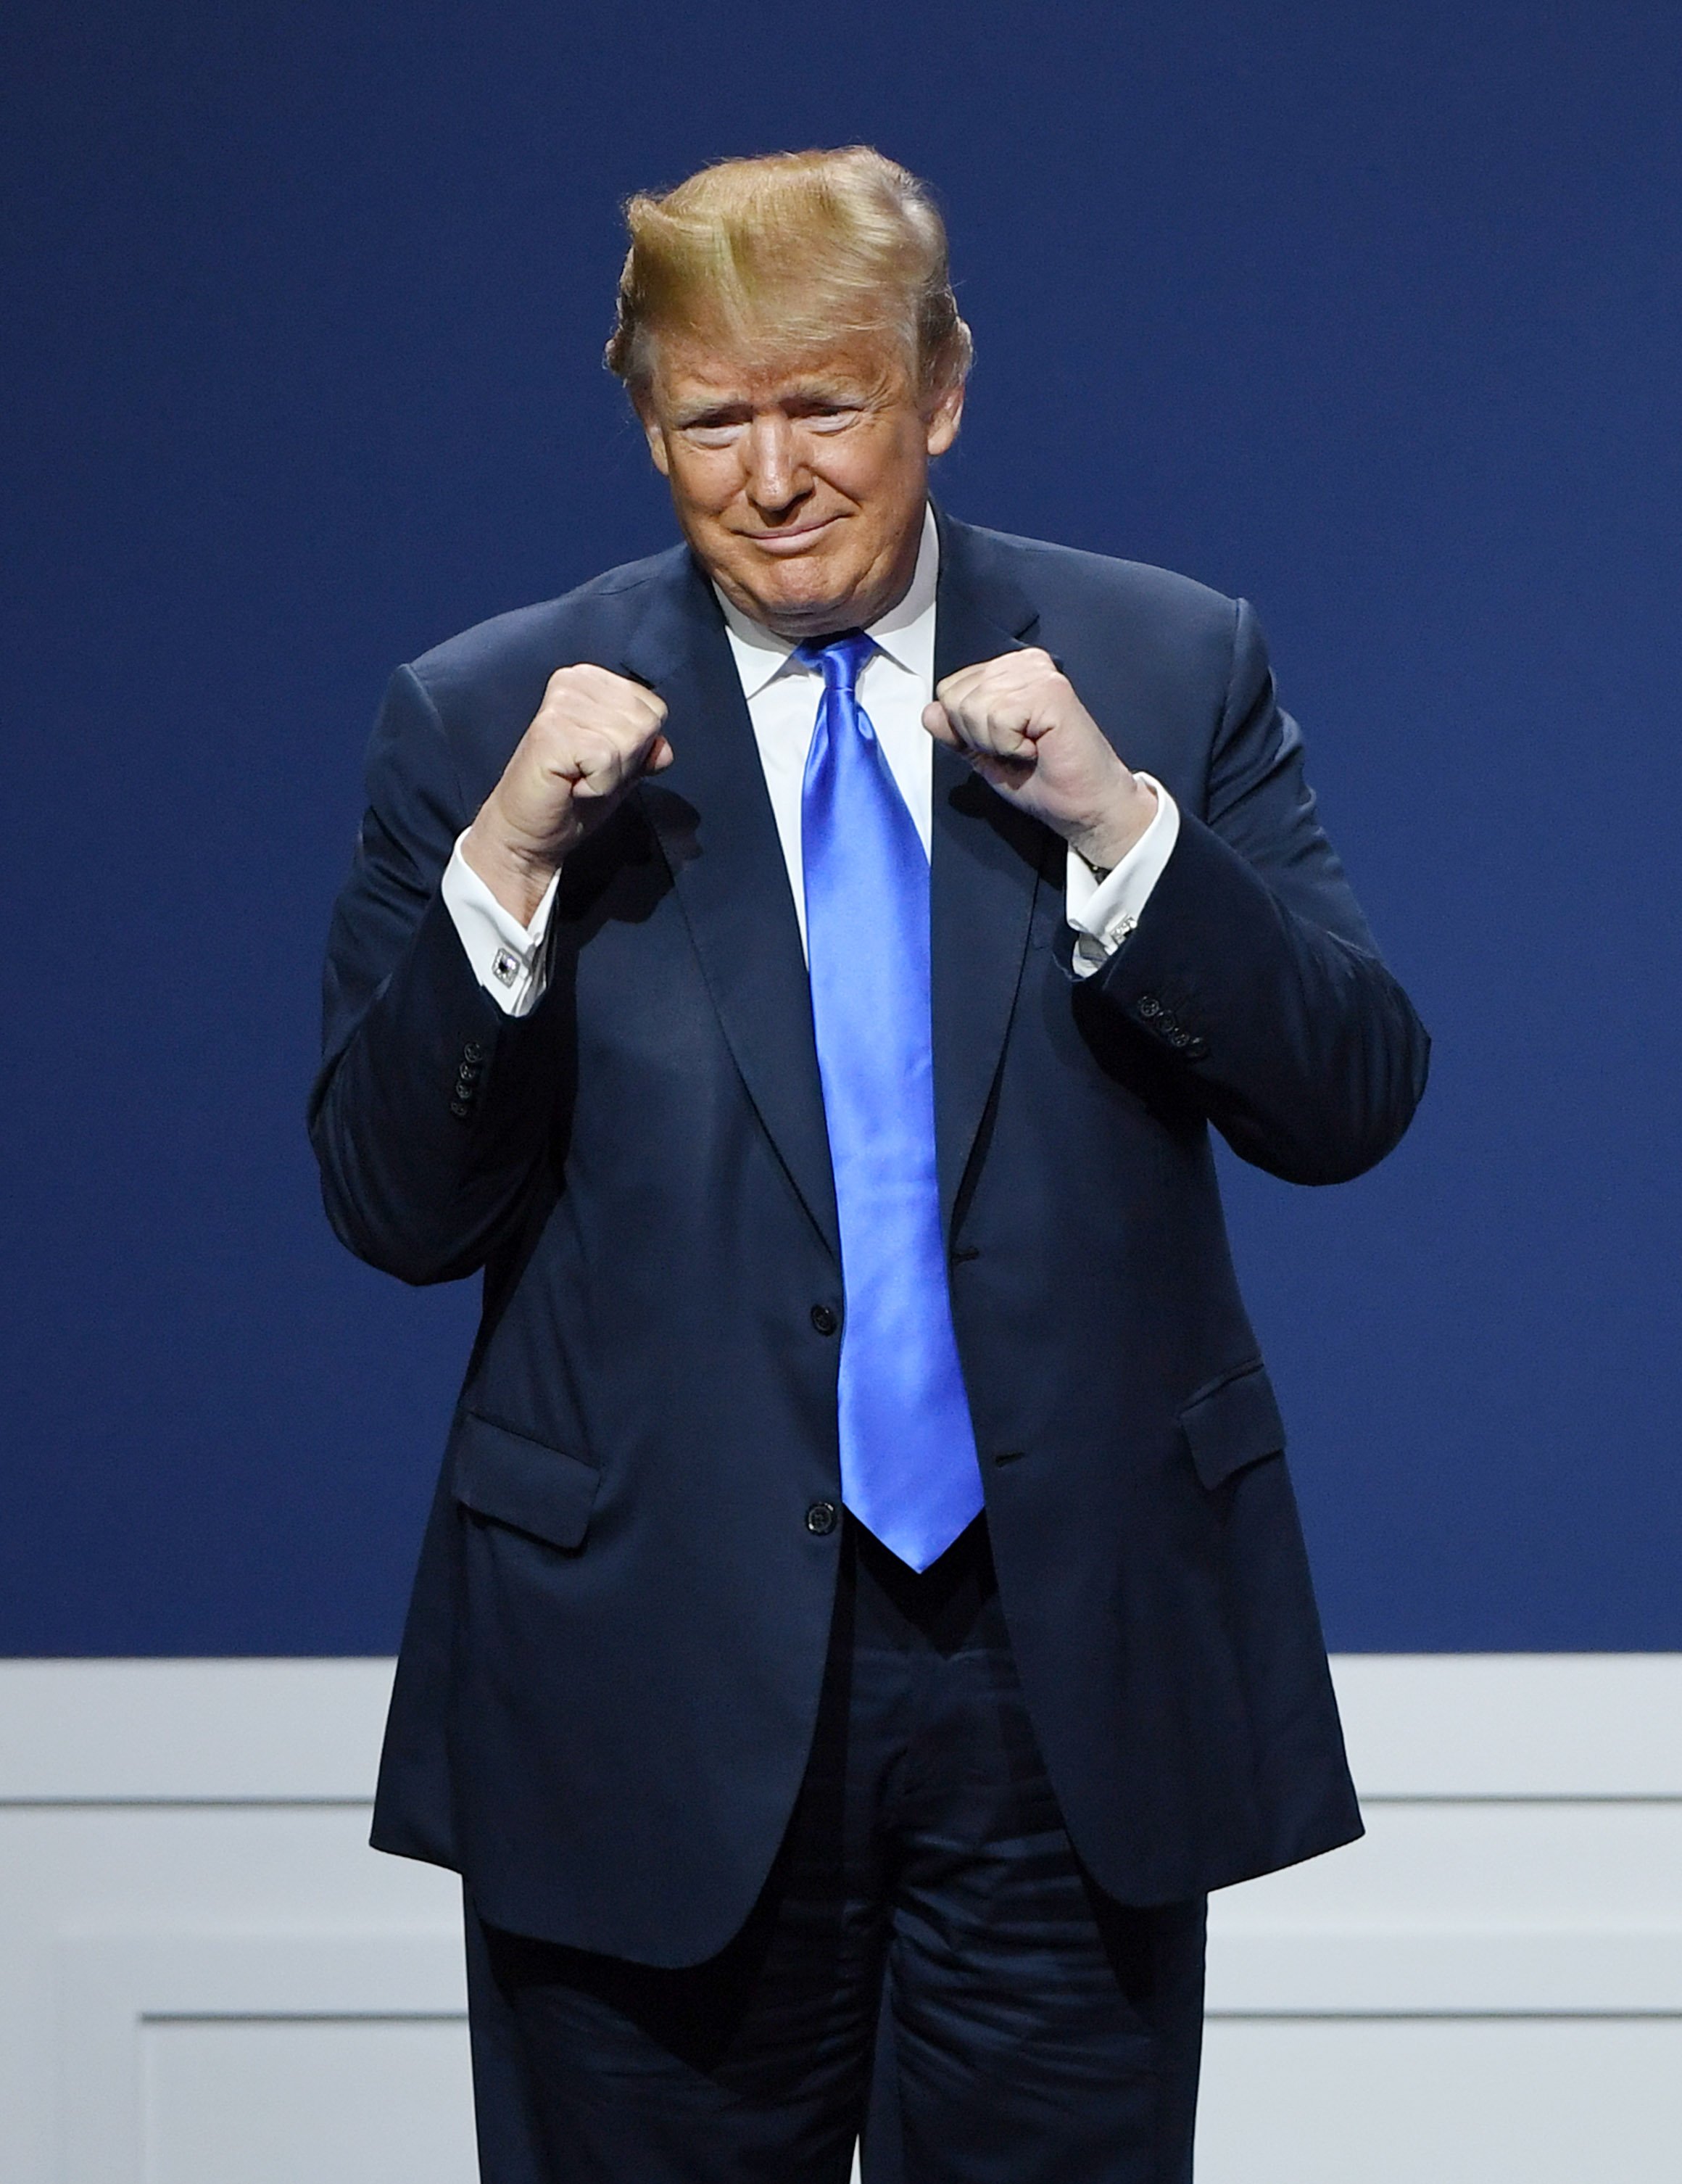 Donald Trump pumps his fists on stage during the Republican Jewish Coalition's annual leadership meeting at The Venetian Las Vegas on April 6, 2019 | Photo: GettyImages